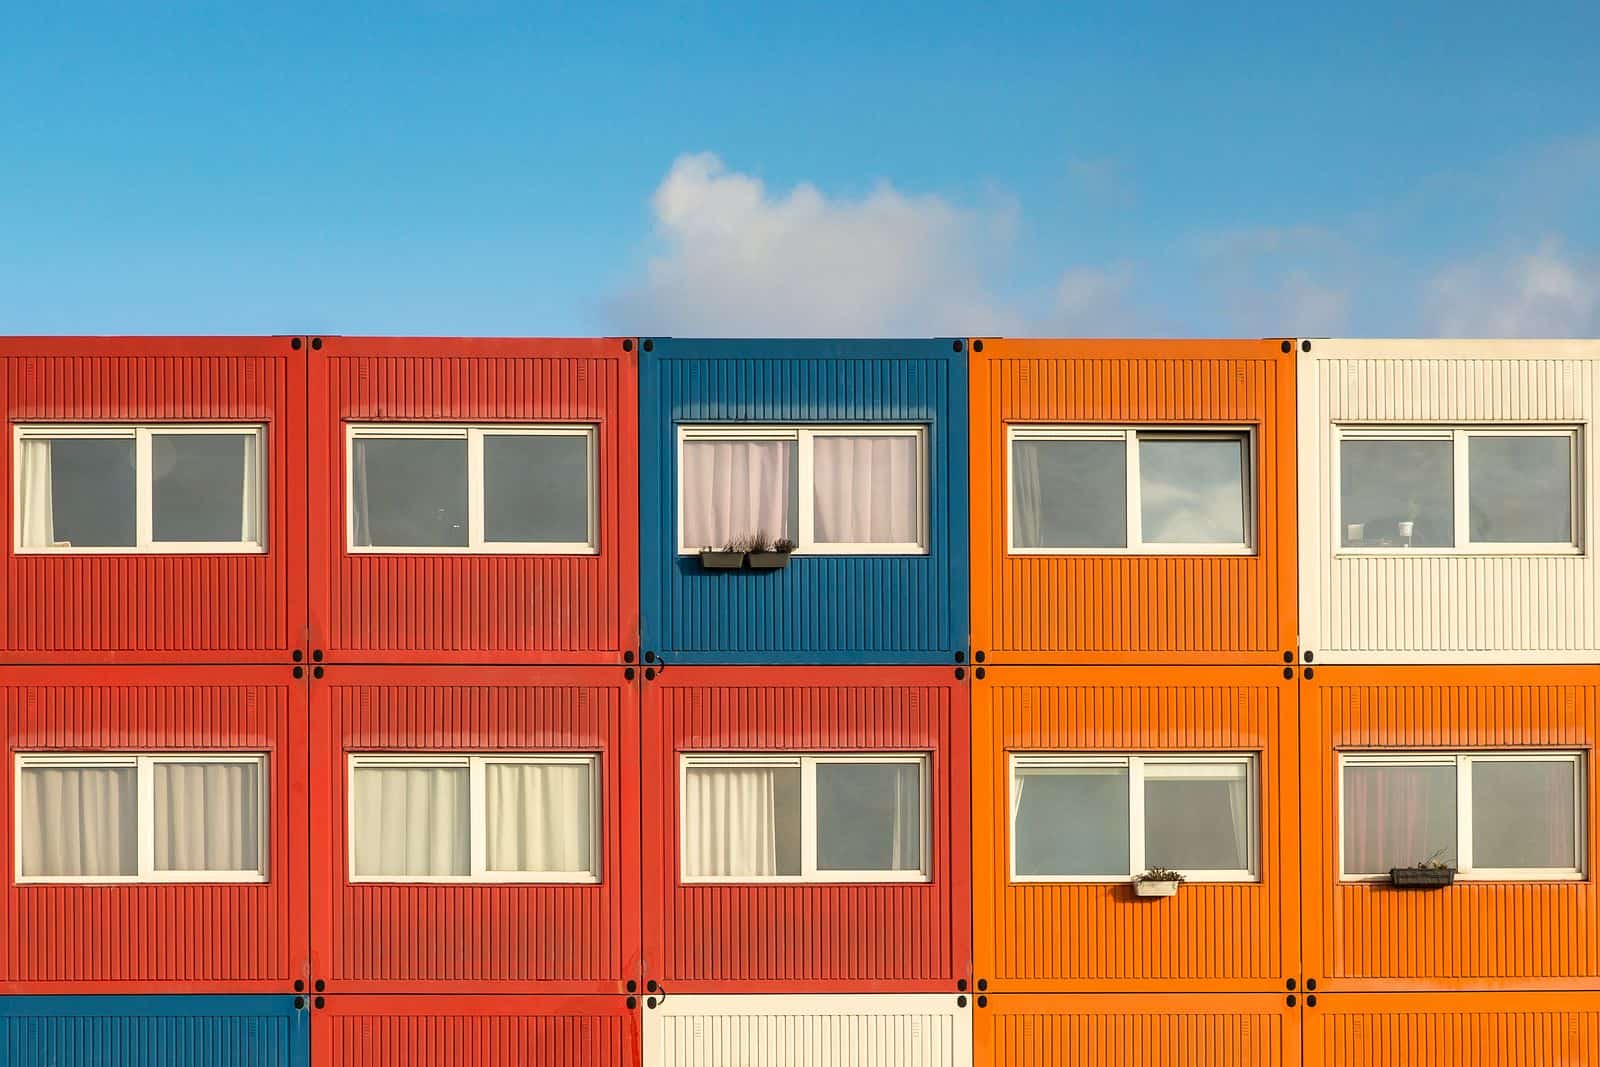 From Looking at Shipping Containers for Sale to Making Them Homes